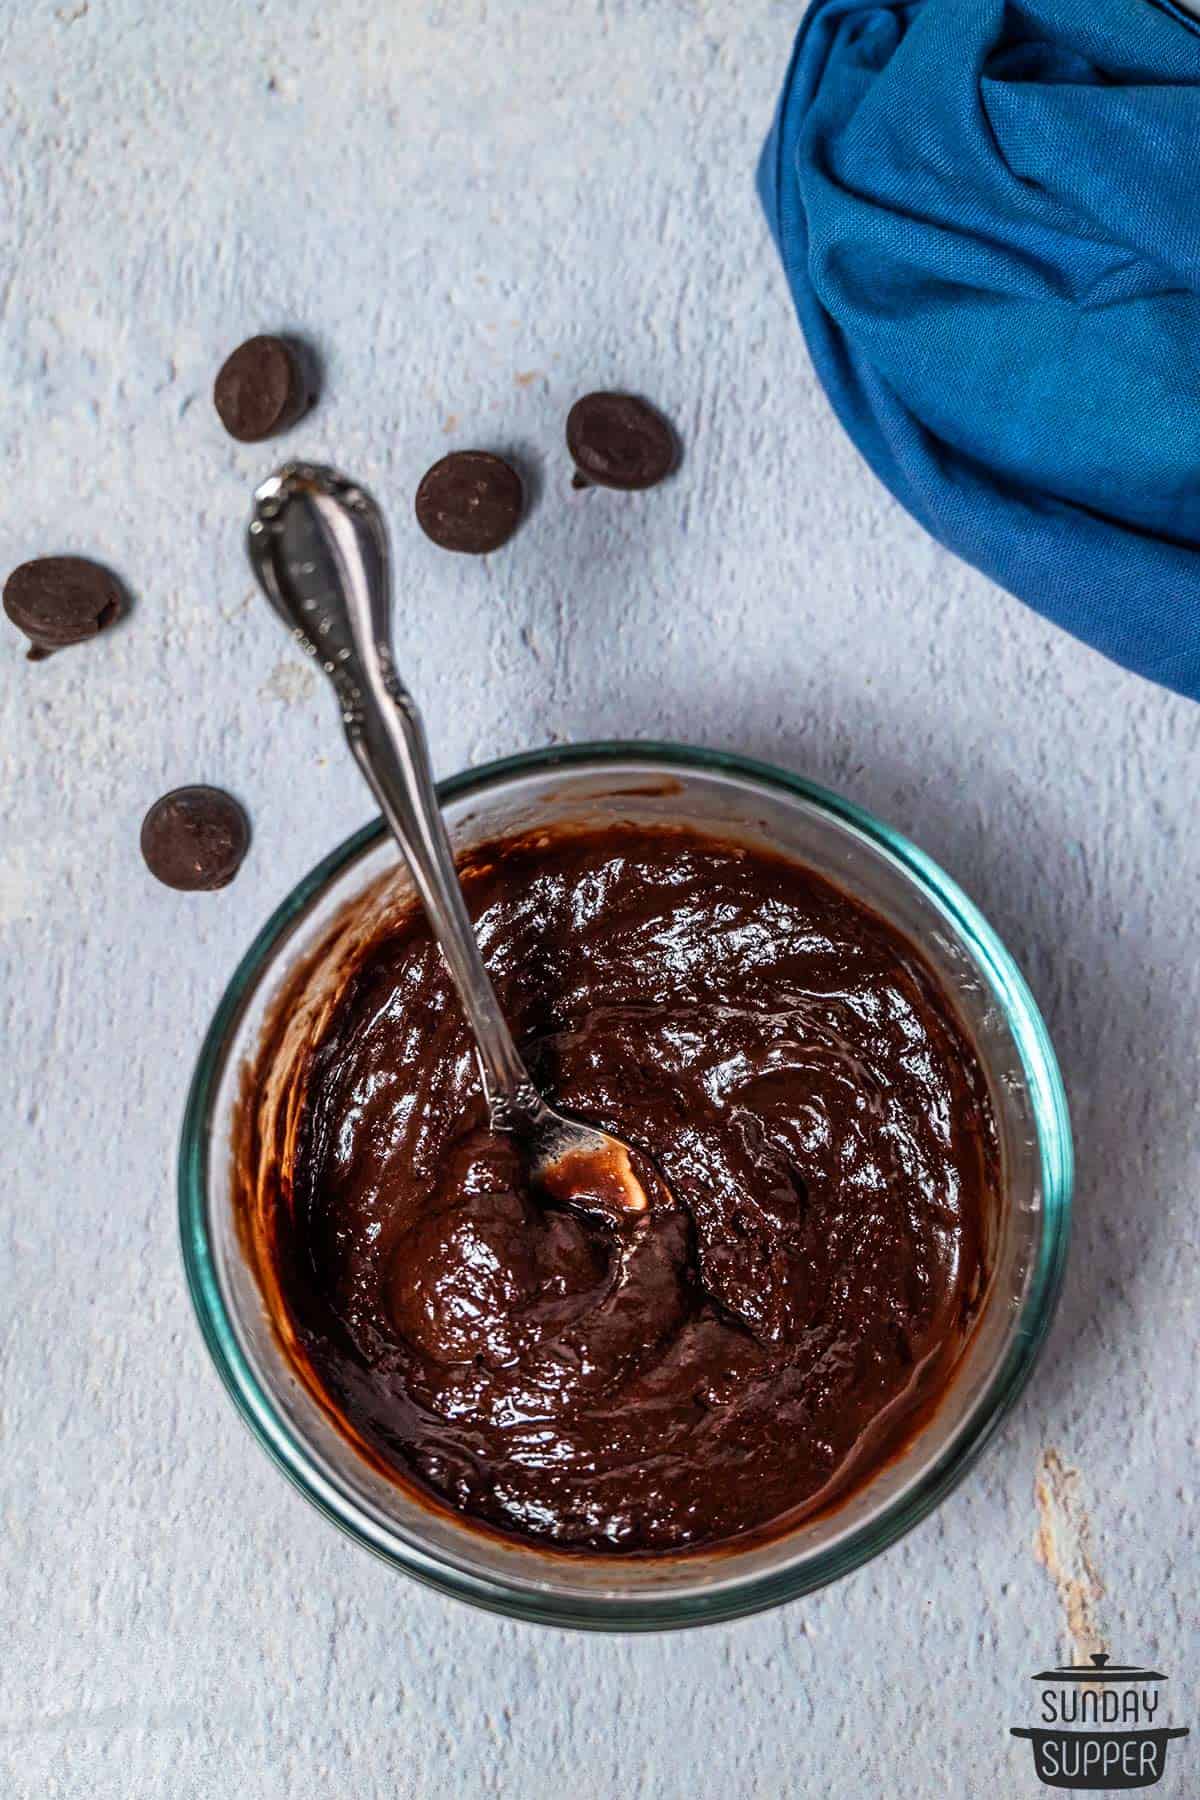 partially melted chocolate sauce in a bowl with a spoon